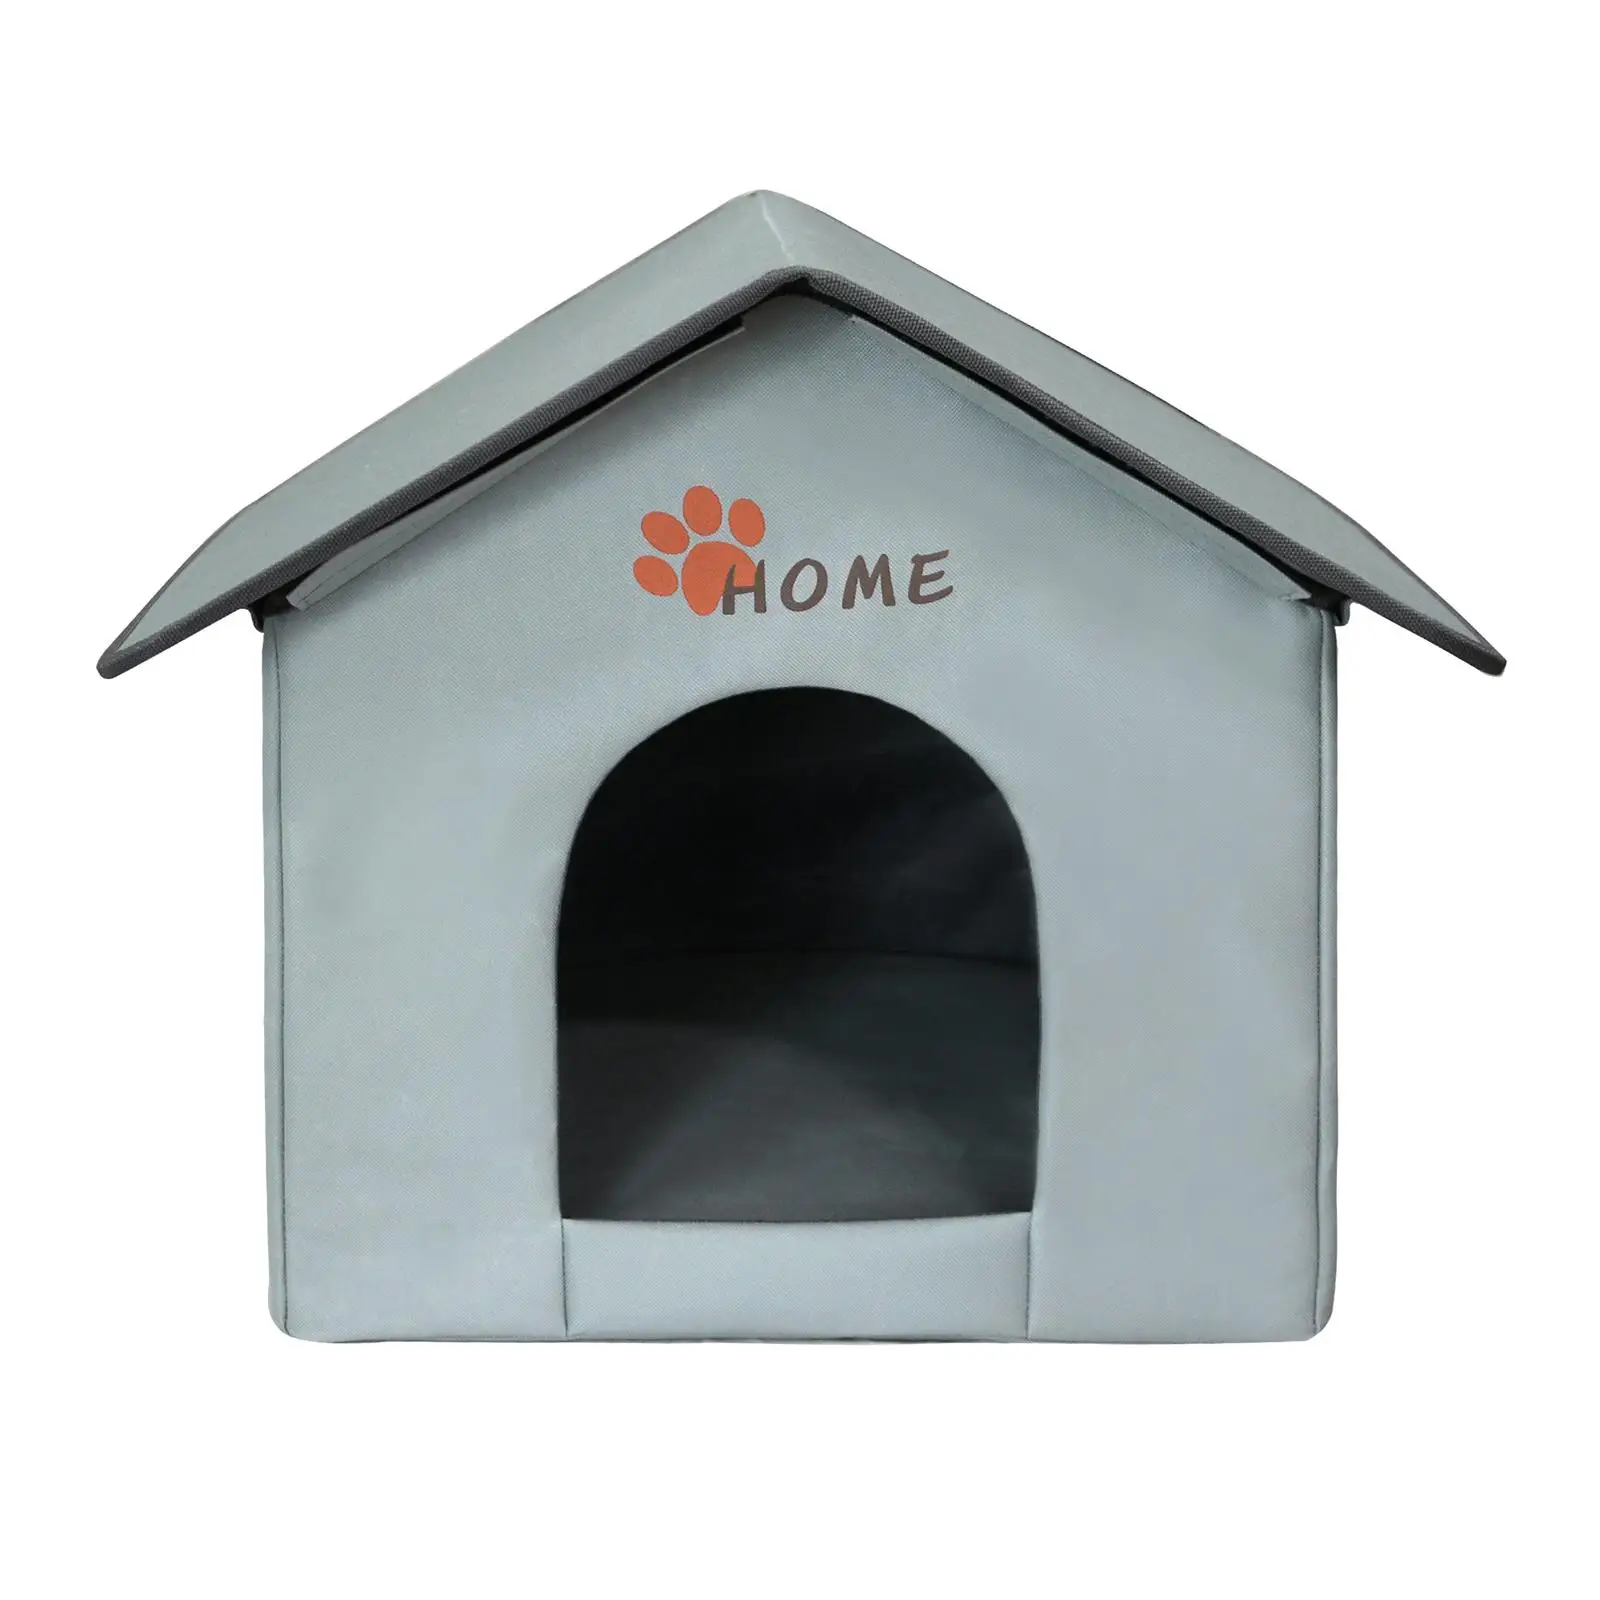 Outdoor Cat House Sleeping Weatherproof Warm House Feral Cat Shelter Cave Pet Bed for Lawn Kitten Small Medium Cats Puppy Garden